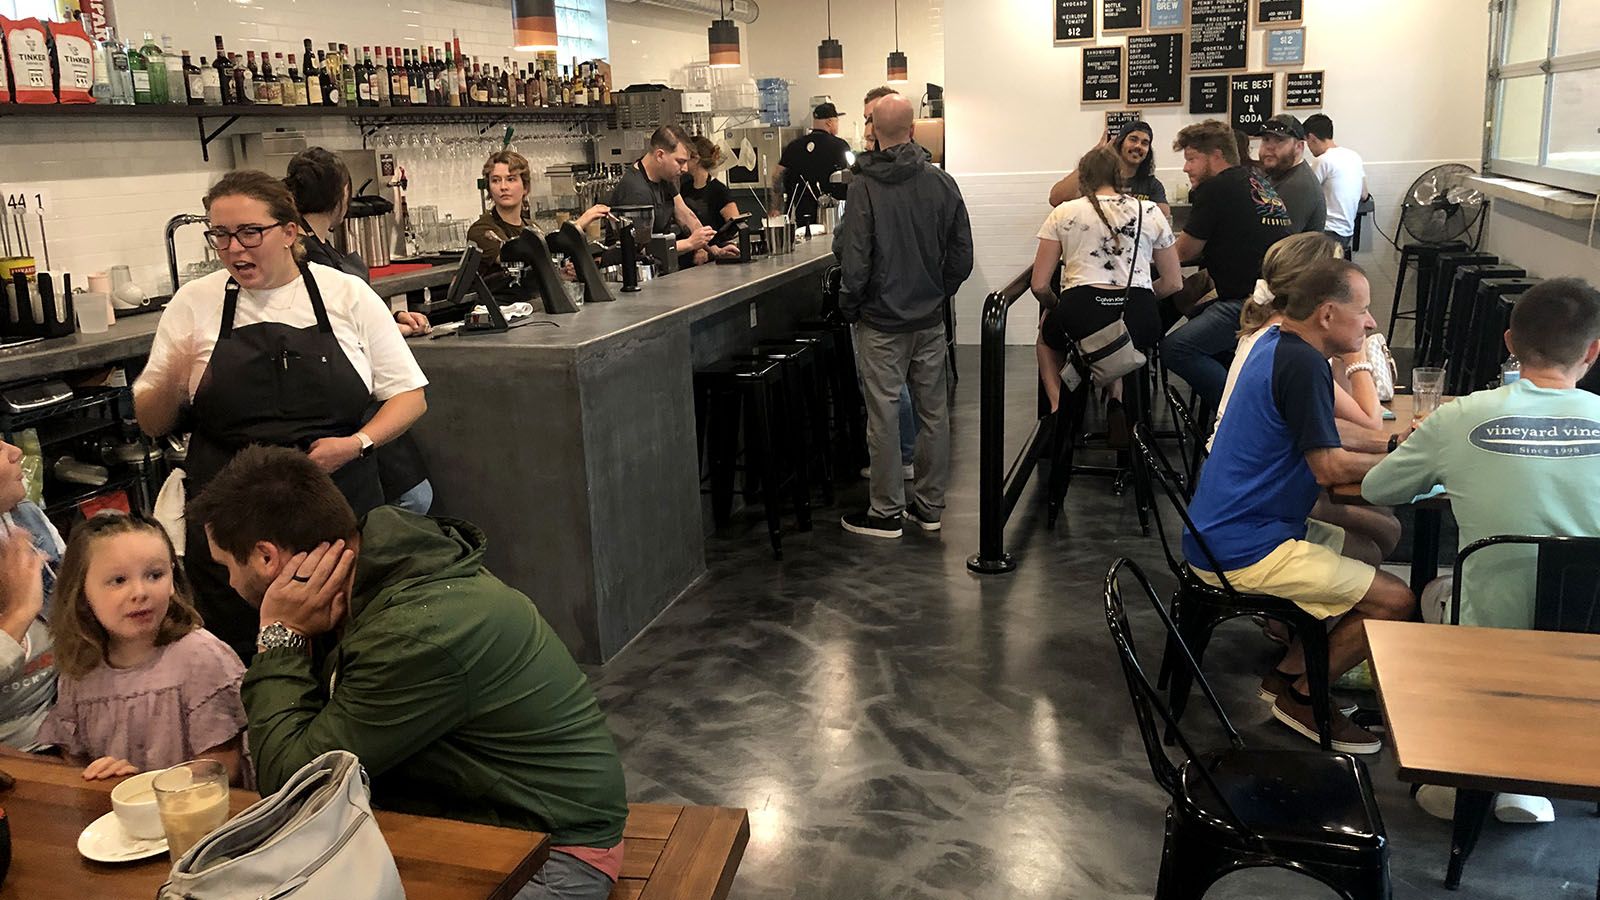 Penny Drip is the latest coffee shop to open downtown.